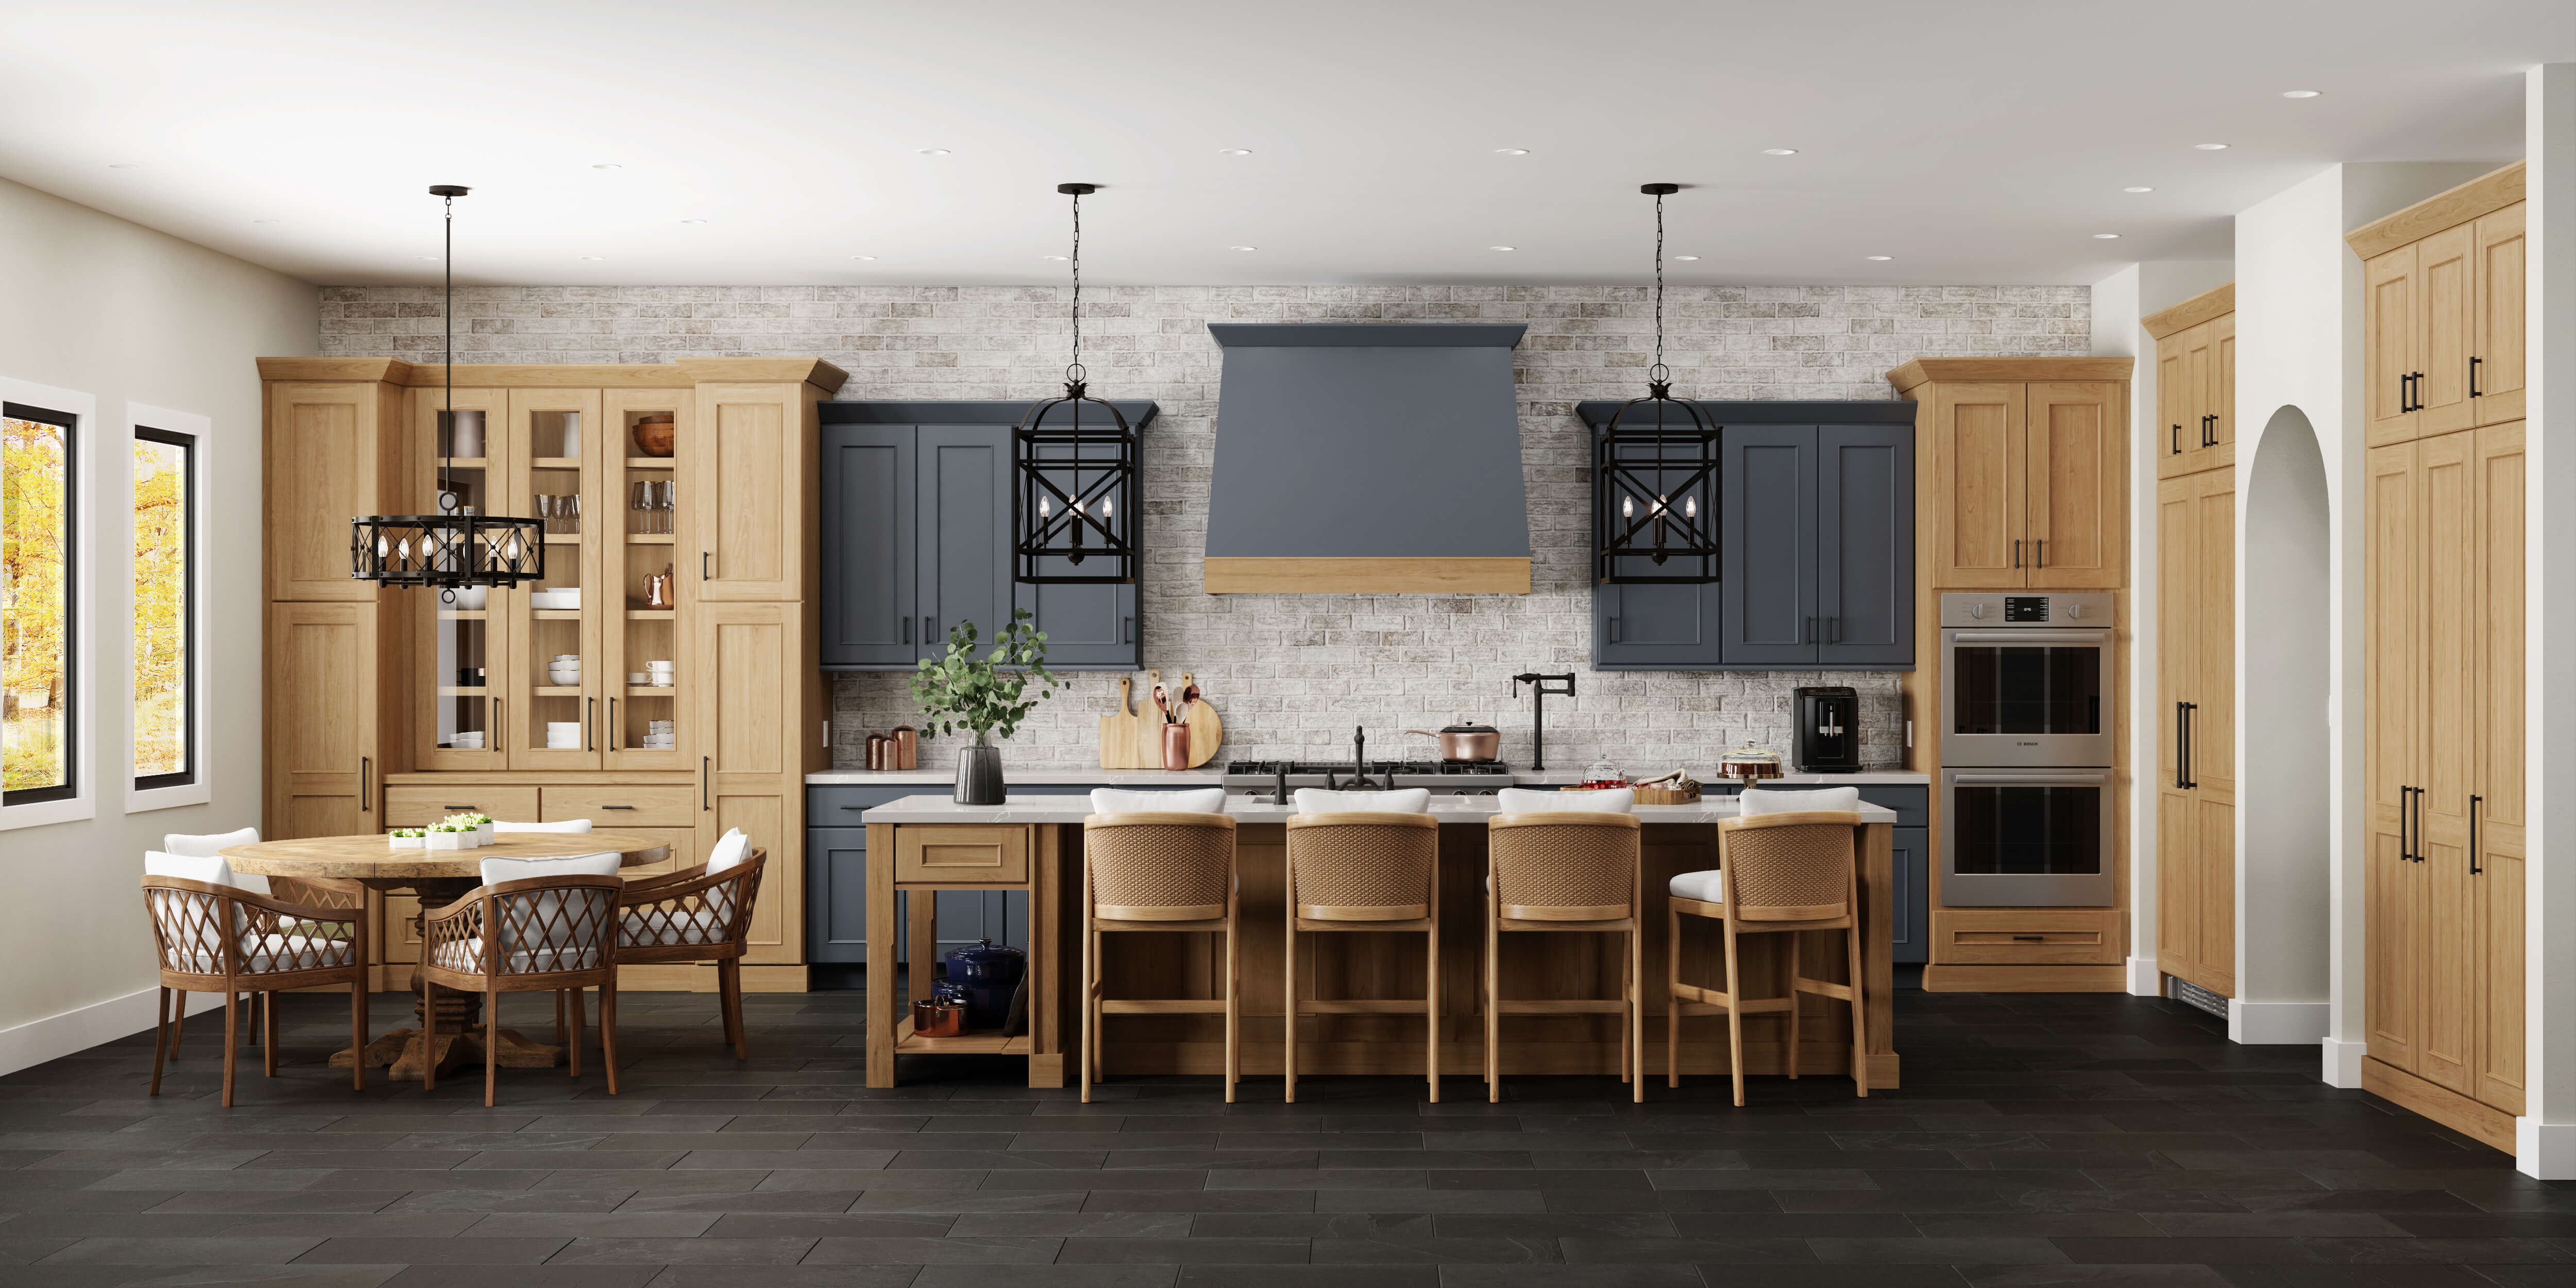 A modern English styled kitchen design with dark navy blue and light stained cherry wood cabinets.